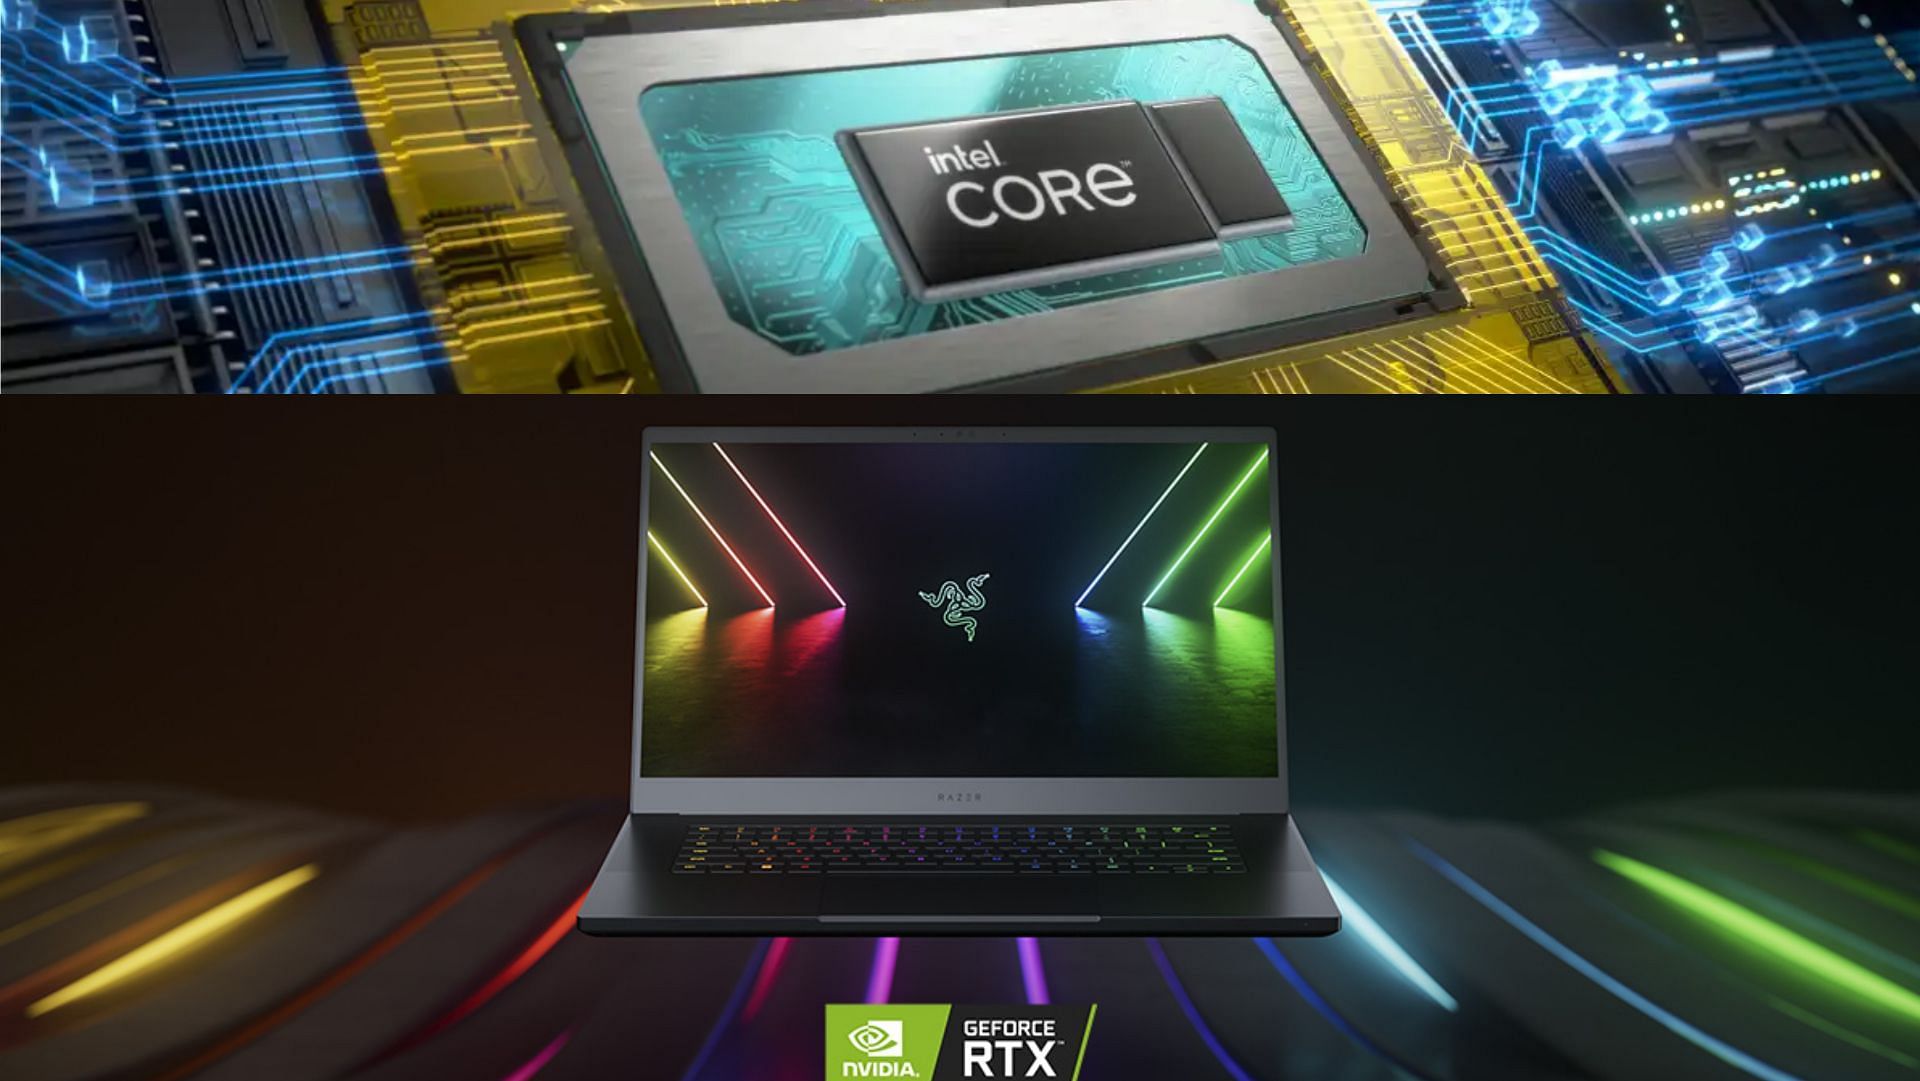 The Razer gaming laptops range are second to none (Image by Razer and Intel)